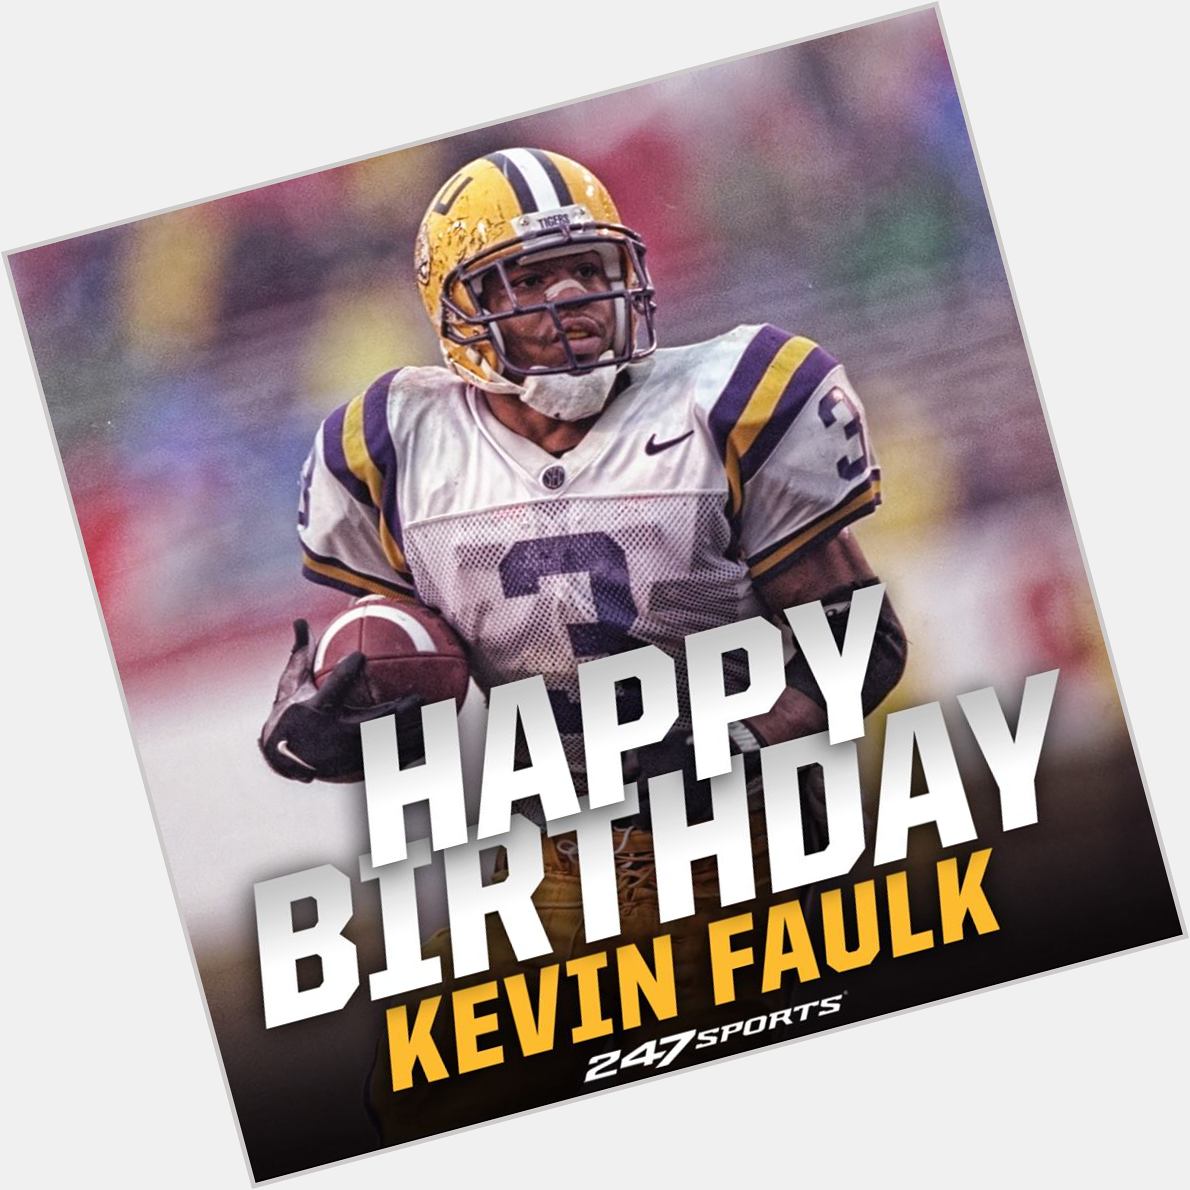 Happy birthday to one of the greatest to ever lace em up for the Tigers, Kevin Faulk! 